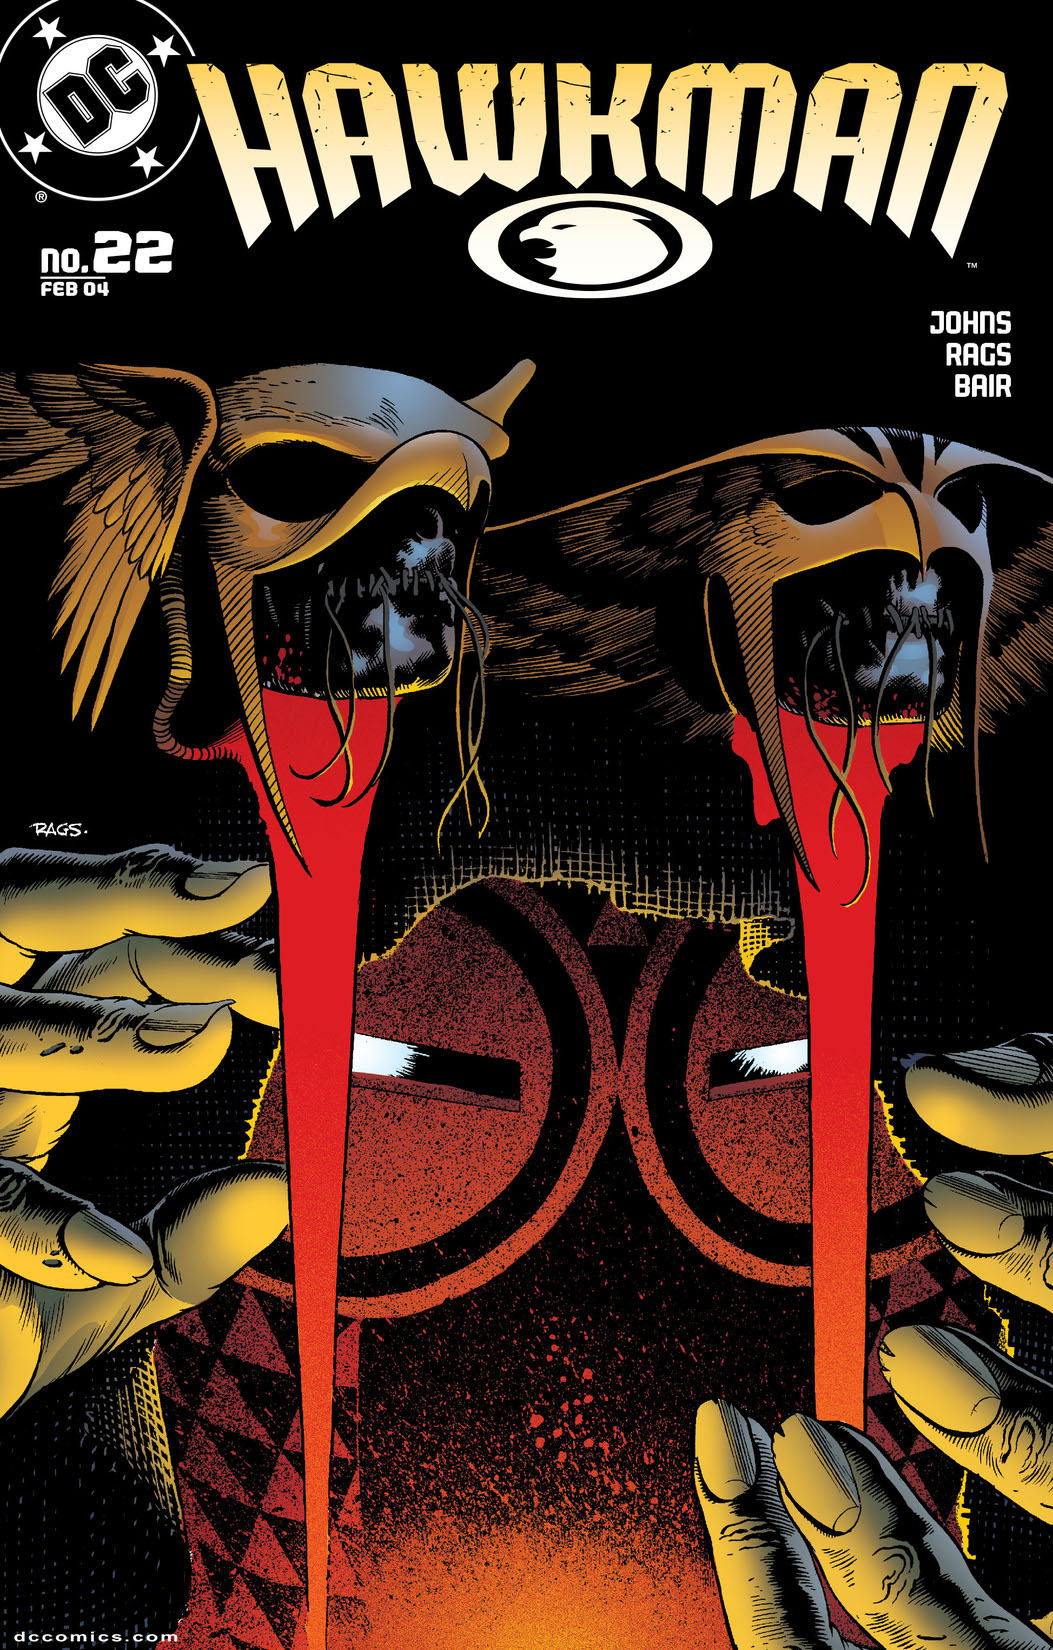 Hawkman (2002-) #22 preview images